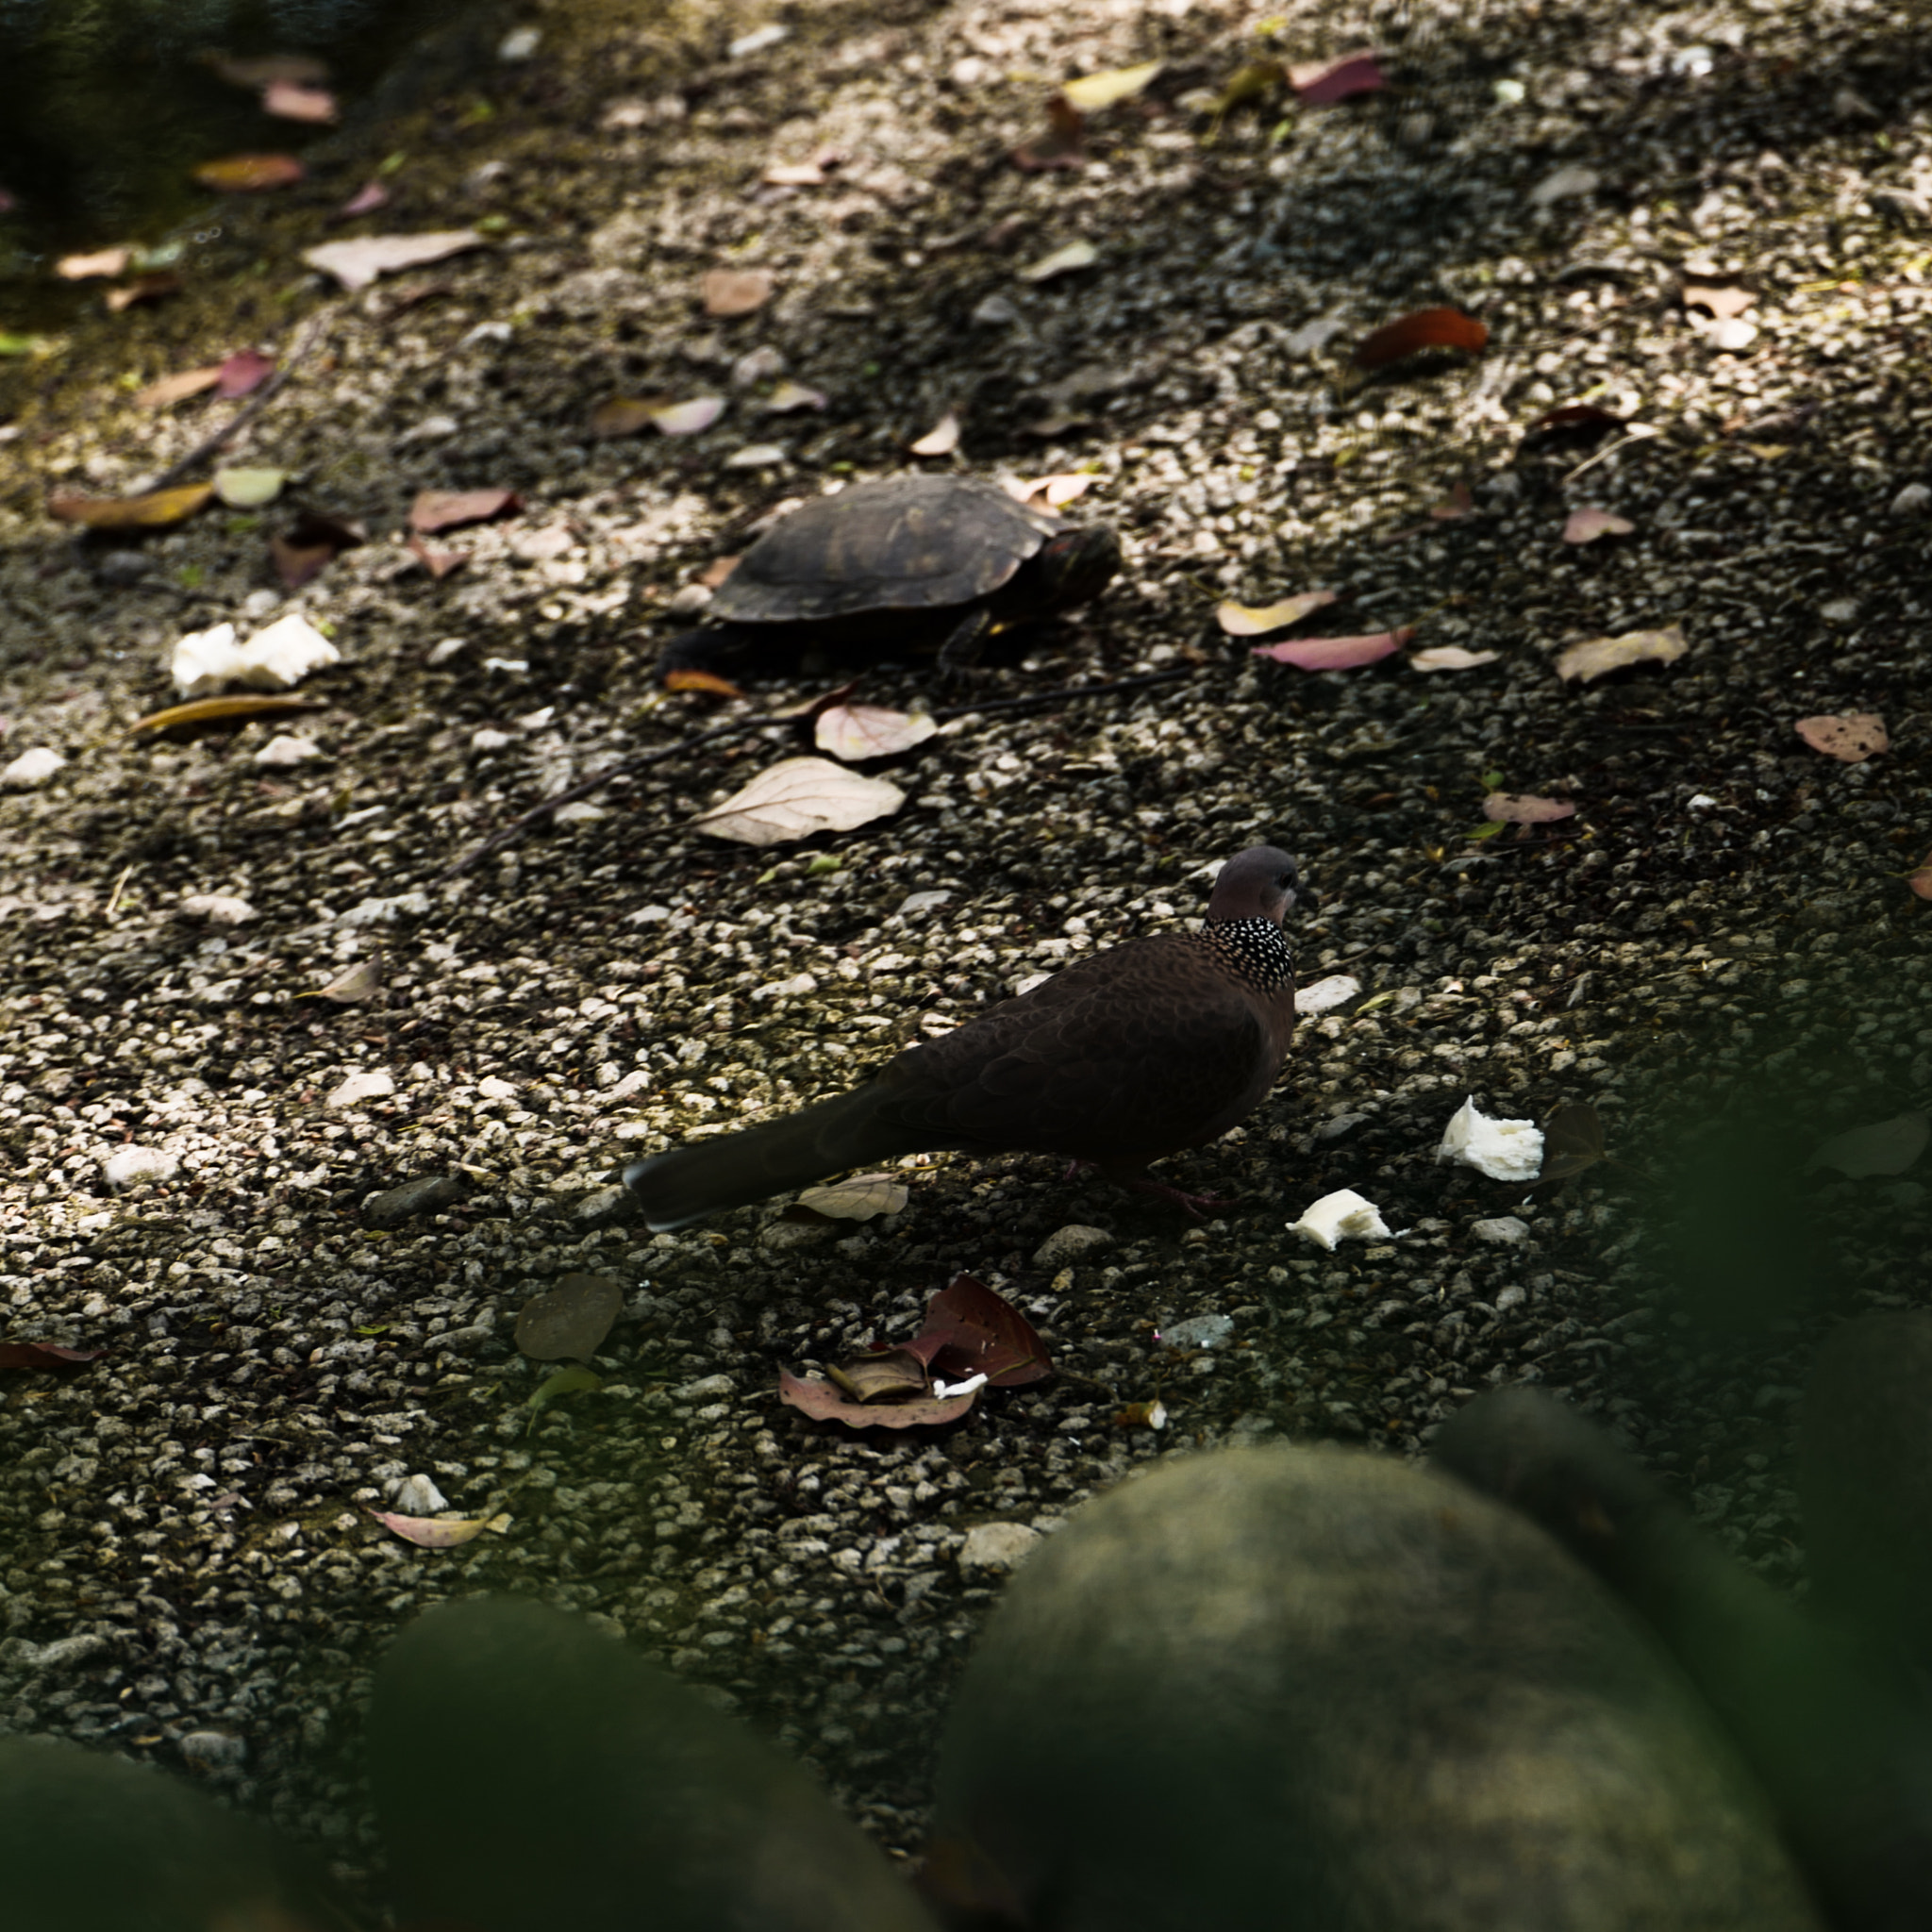 Leica SL (Typ 601) sample photo. The basking turtle and bird in temple photography